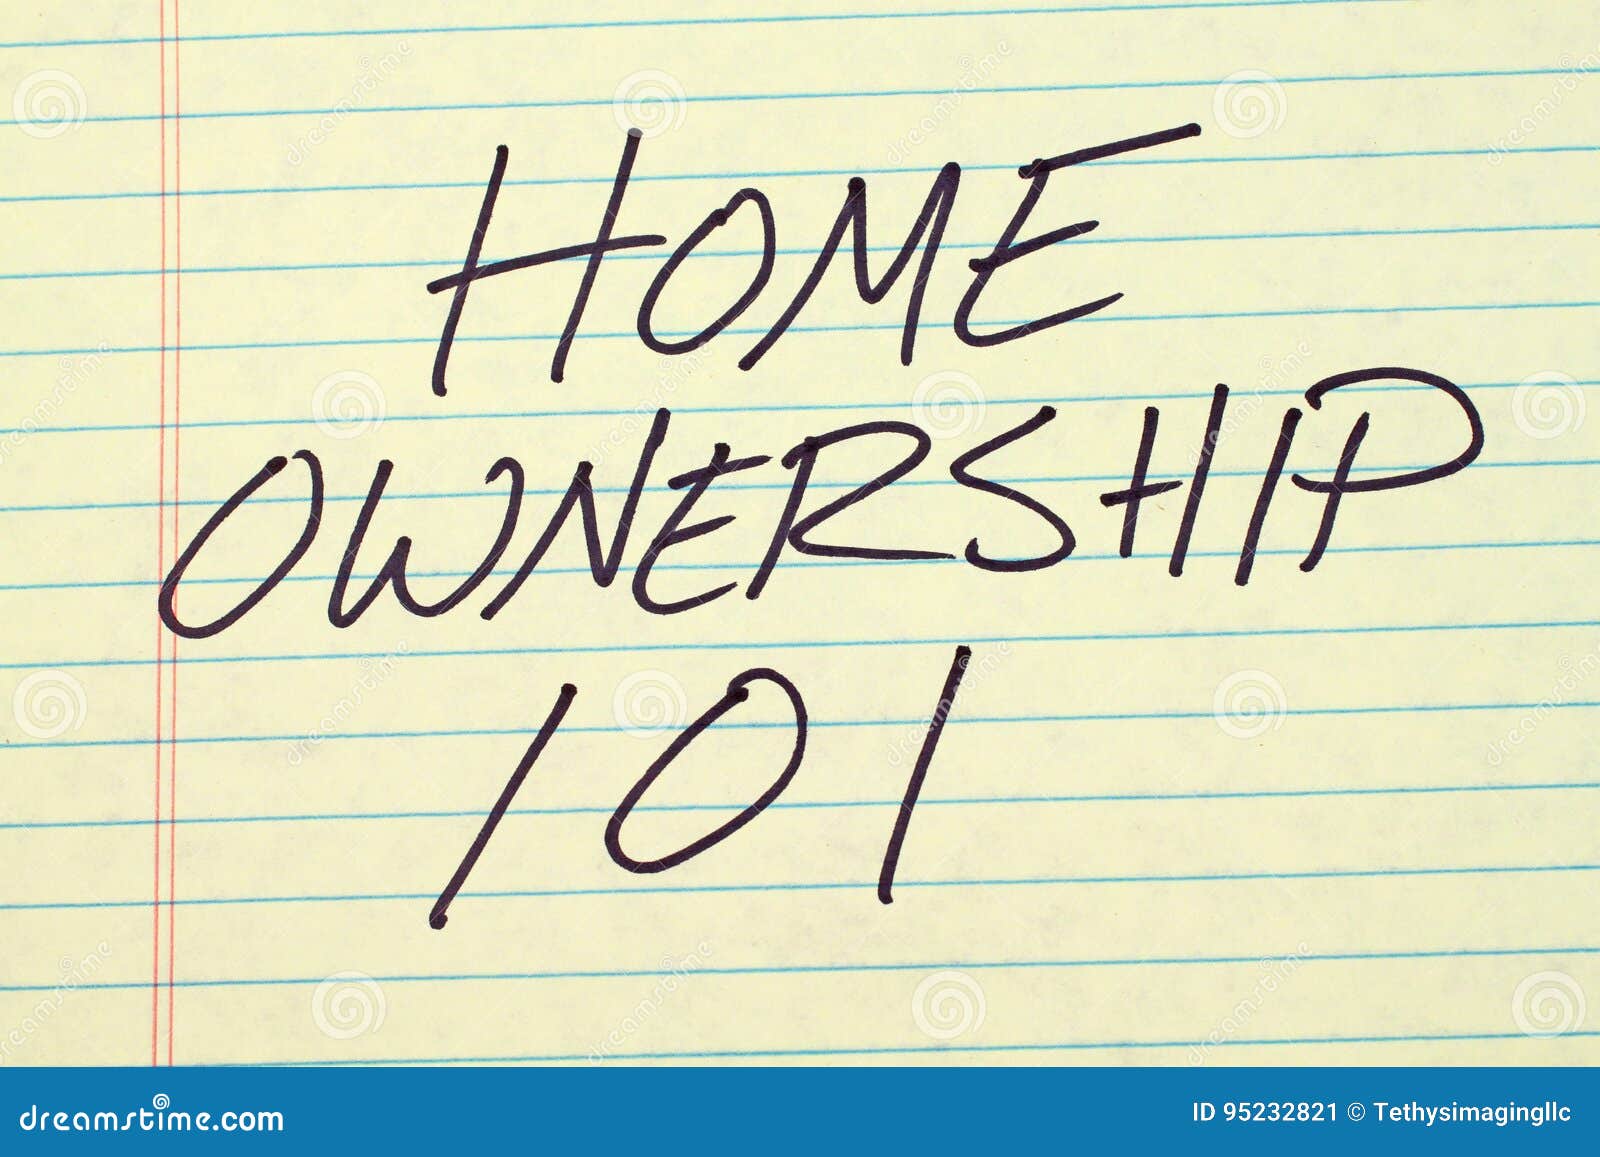 home ownership 101 on a yellow legal pad